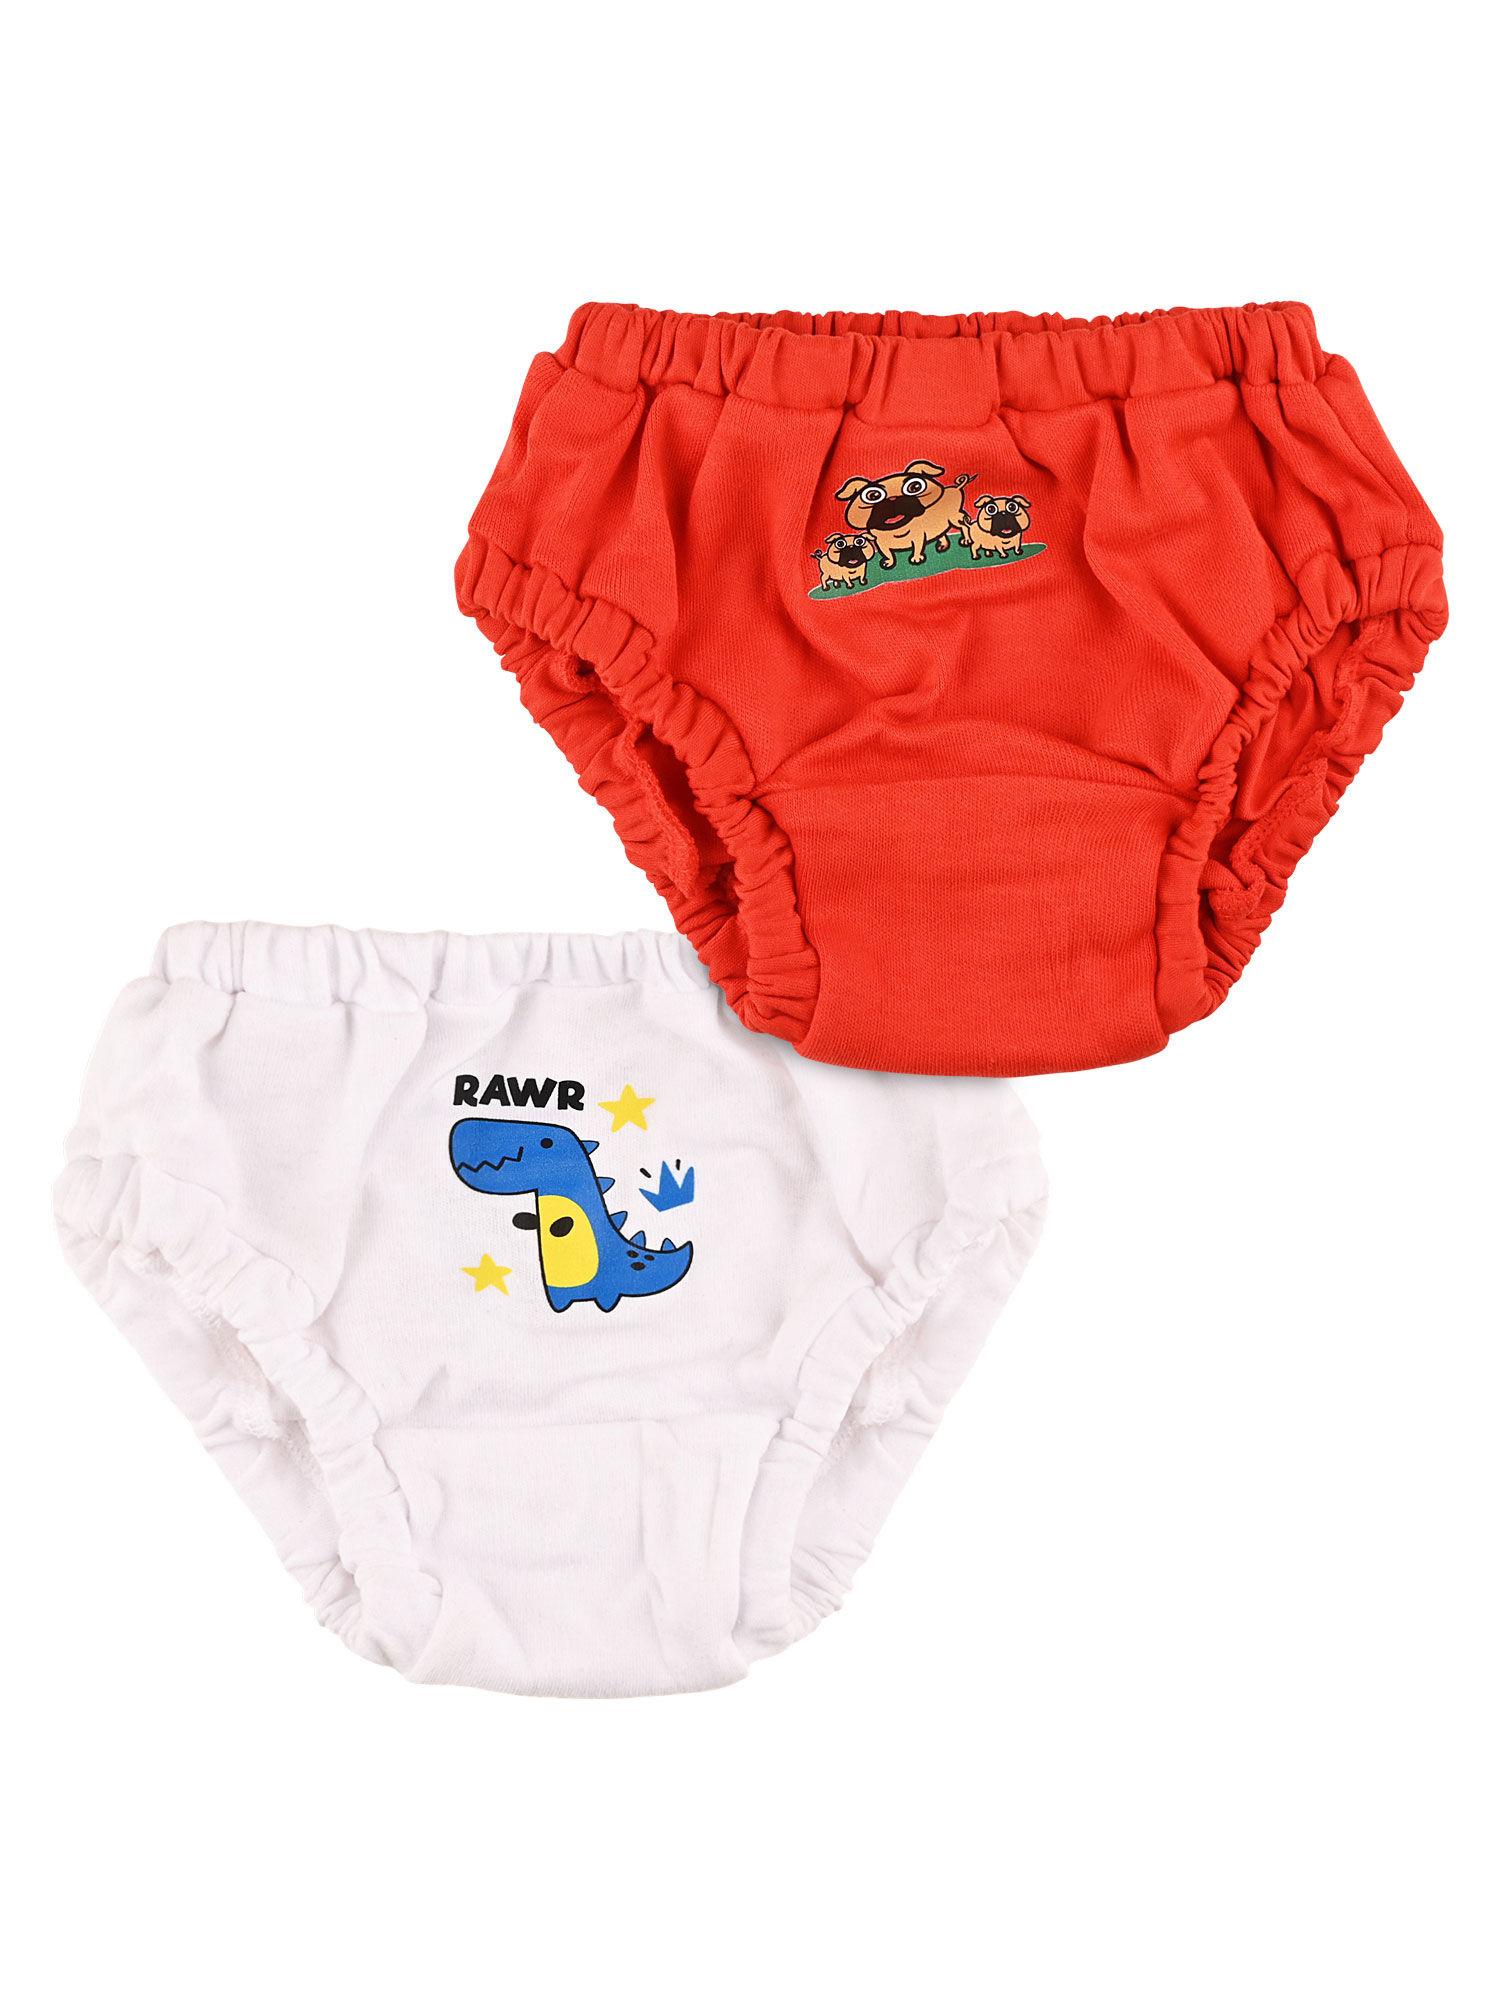 baby-boys-printed-bloomer-brief-underwear-red-and-white-(pack-of-2)